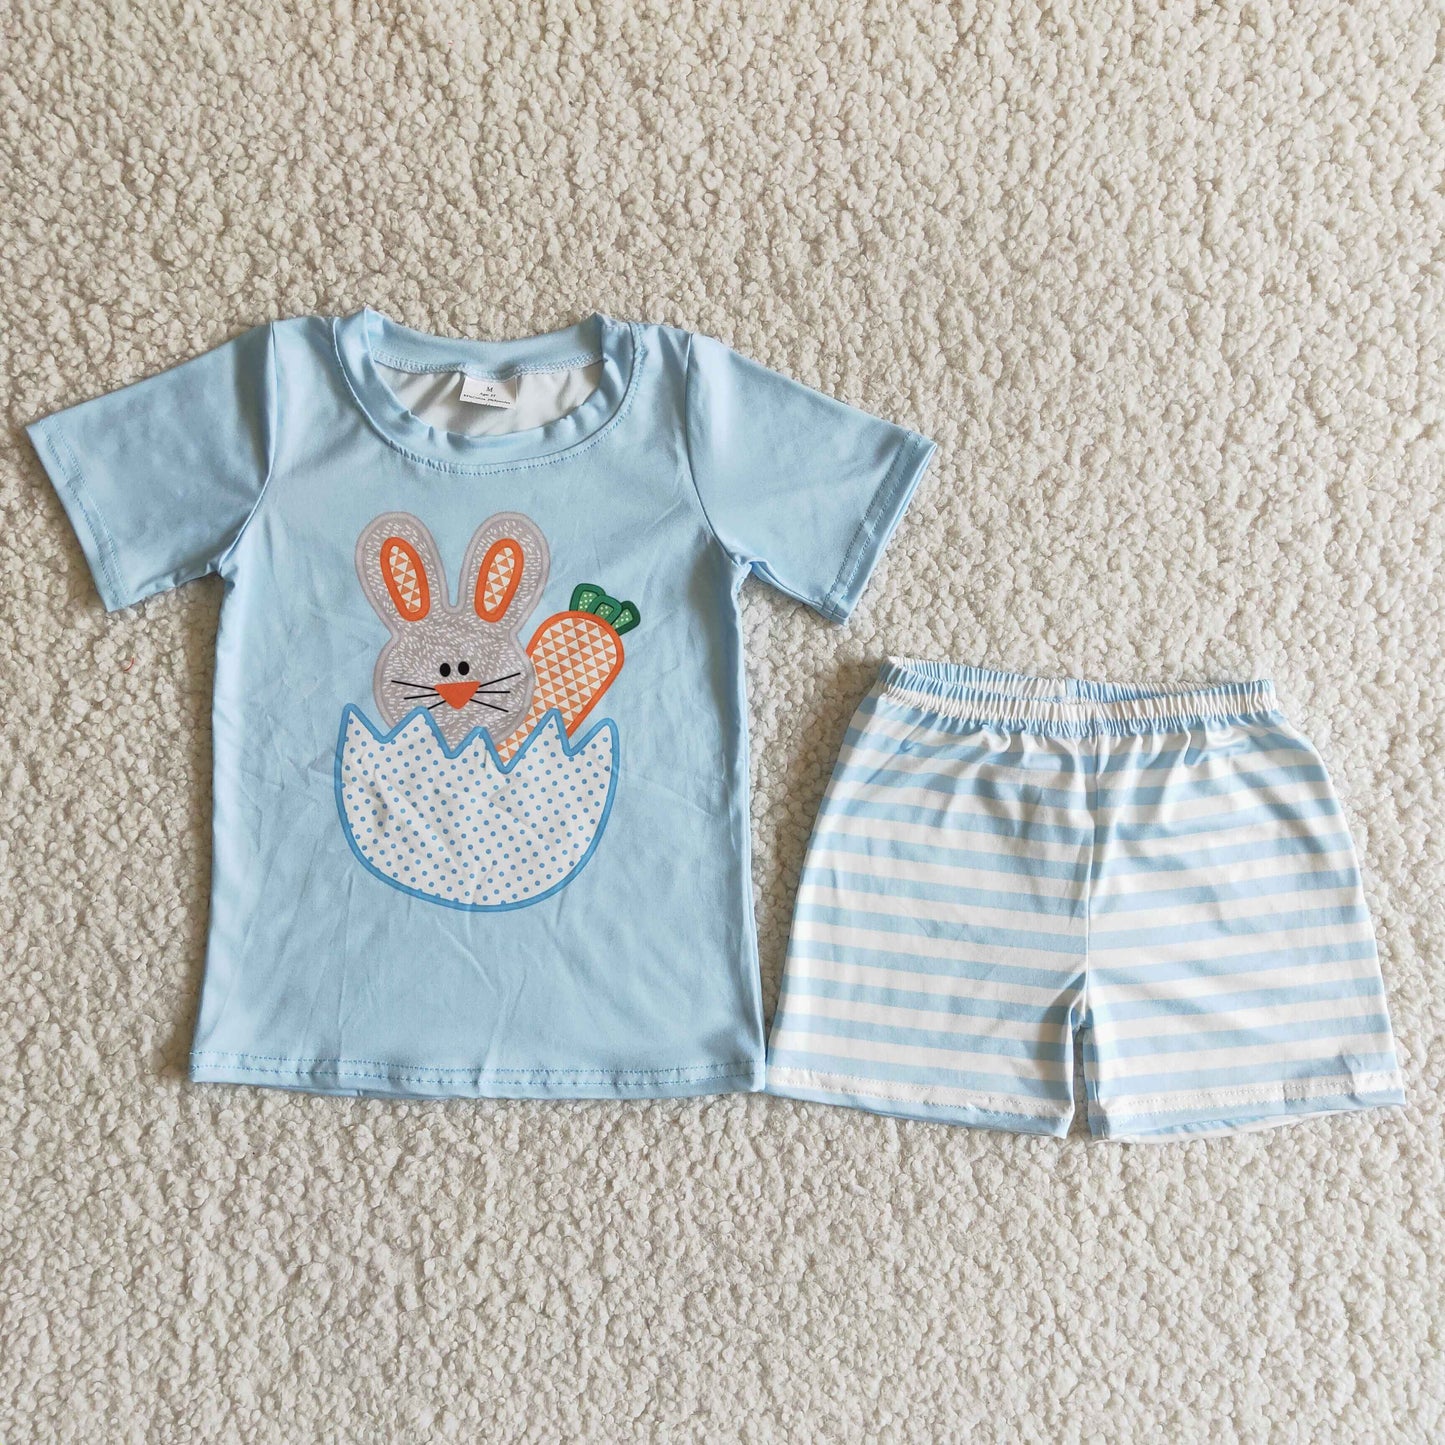 easter boy's outfit clothes shorts set